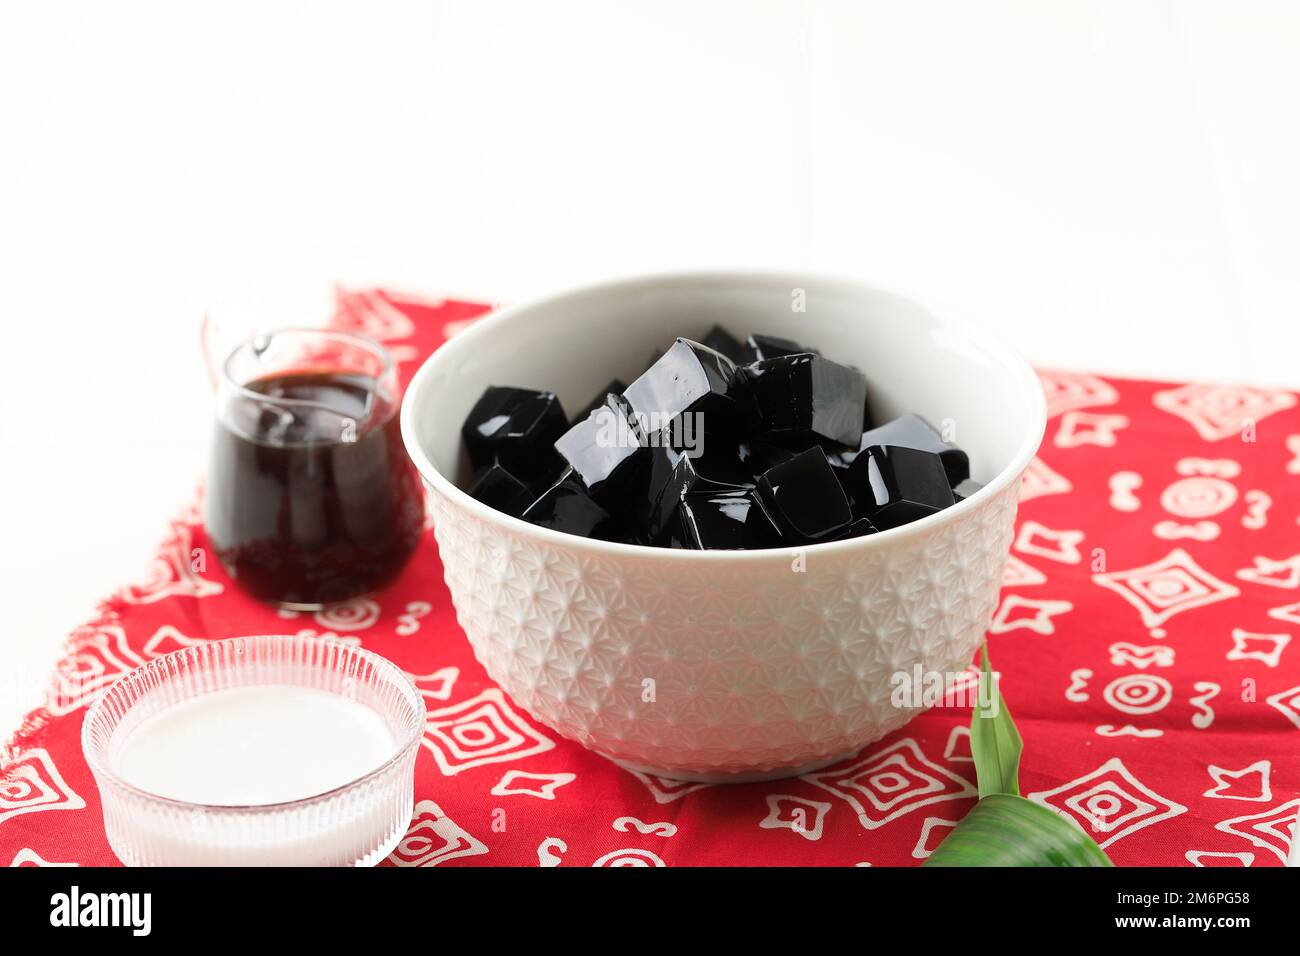 Black Grass Jelly or Leaf Herb Jelly Janggelan. Dessert Eaten in South East Asia. Made from Platostoma palustre. Stock Photo